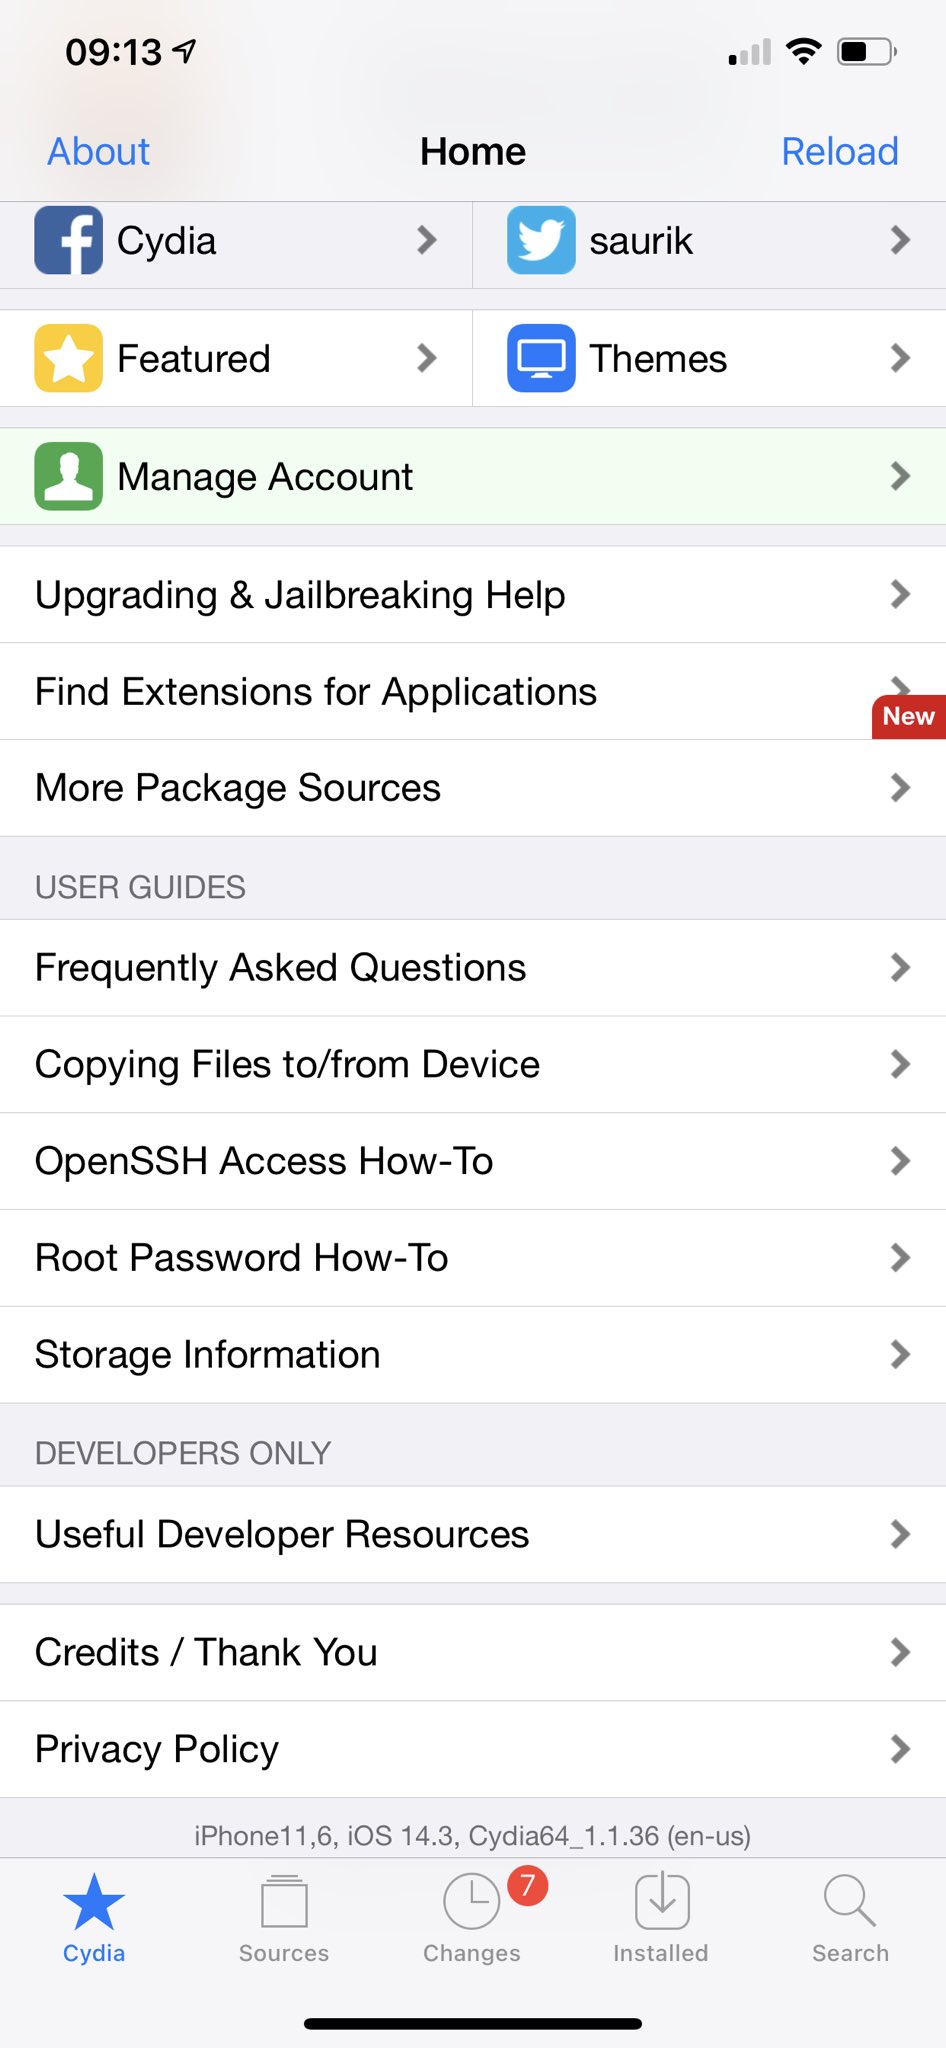 How to Jailbreak iOS Device with Unc0ver and Install OpenSSH